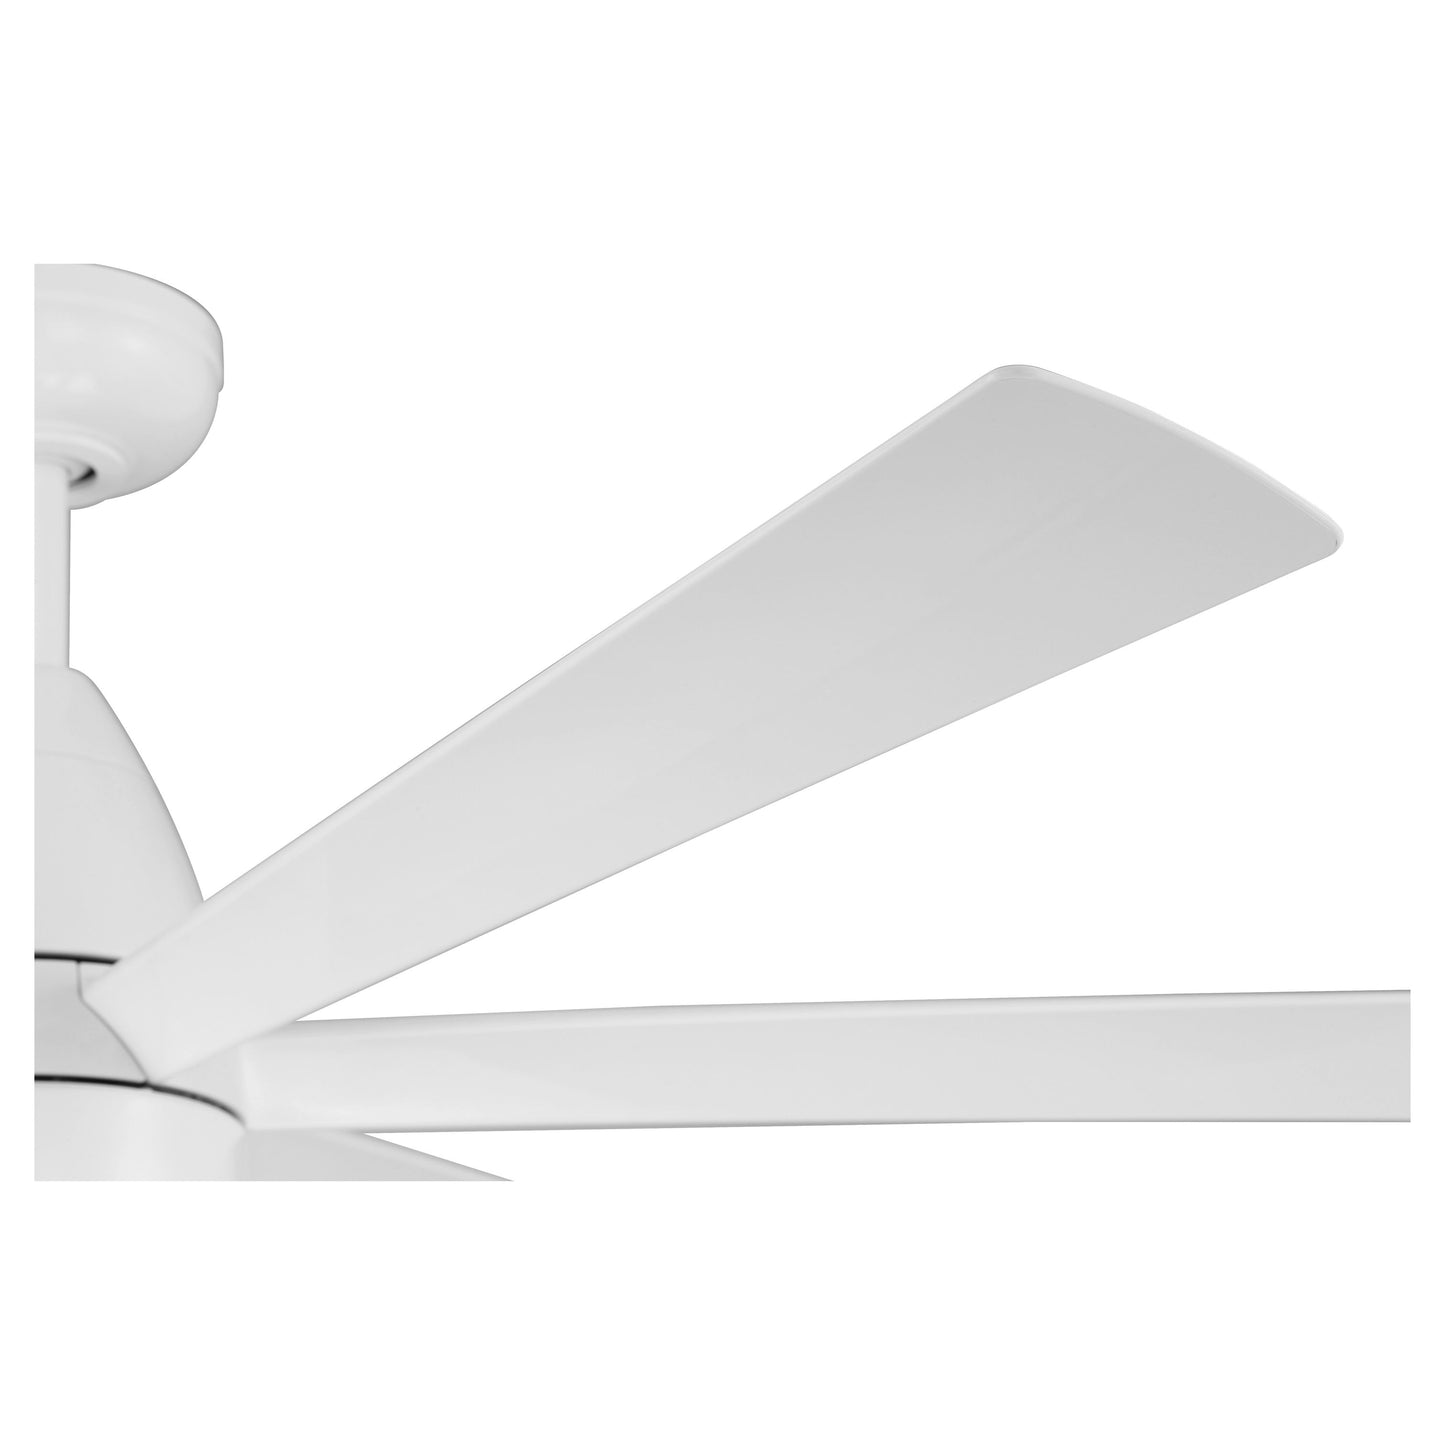 QRK54W6 - Quirk 54" 6 Blade Indoor / Outdoor Ceiling Fan with Light Kit - Wi-Fi Remote Control - Whi